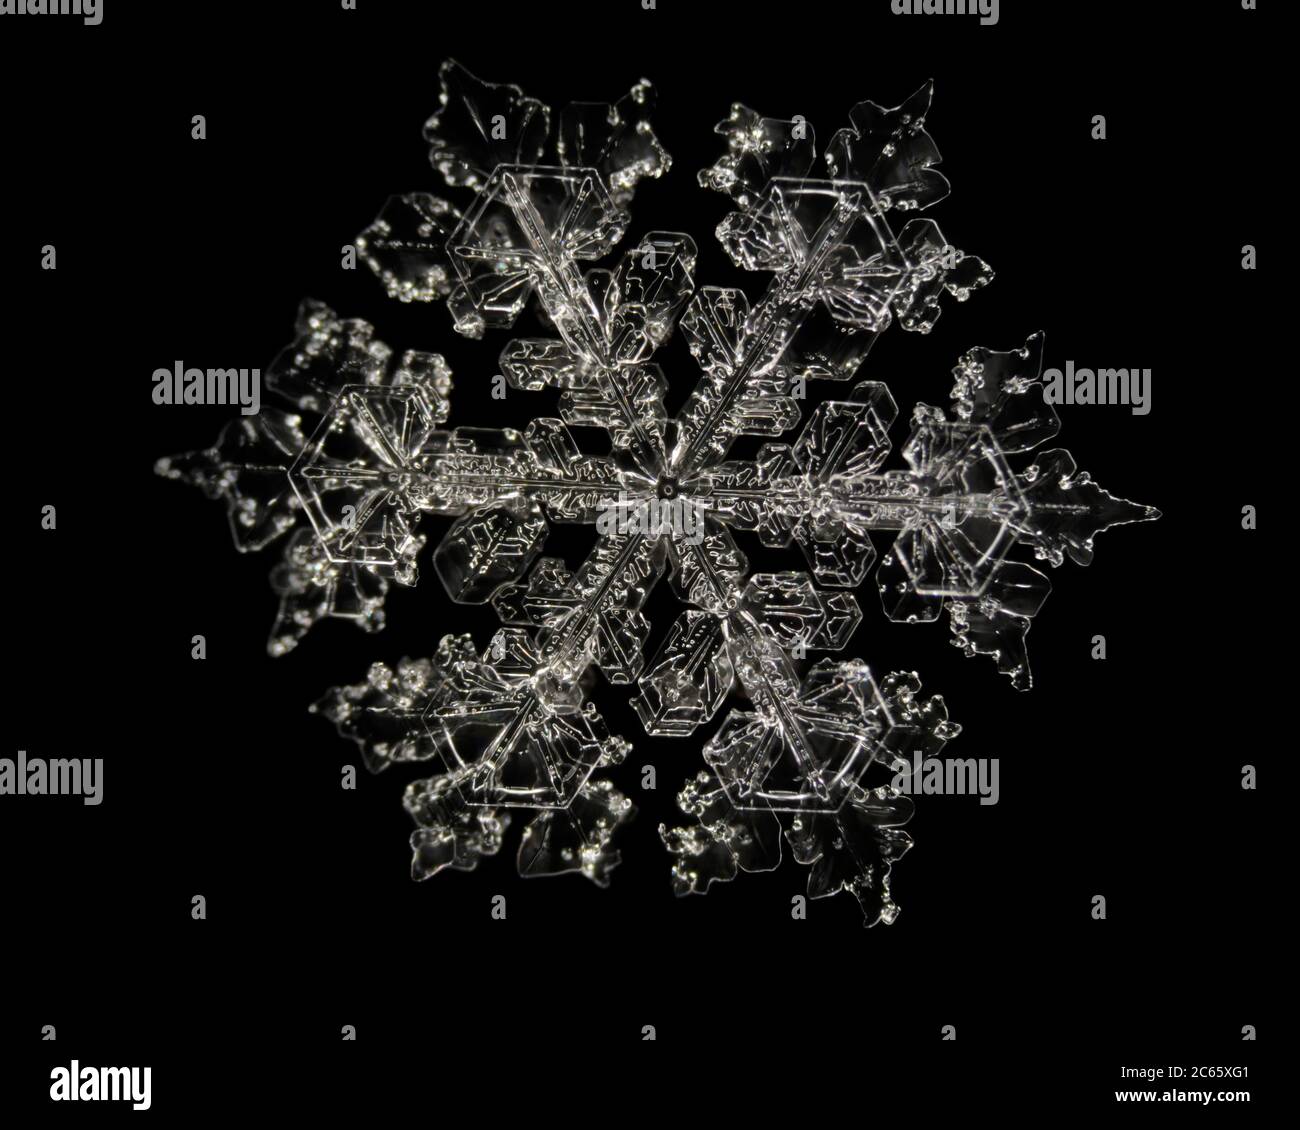 Snow Crystal, Snowflake magnified under microscope, Lillehammer, Norway Stock Photo